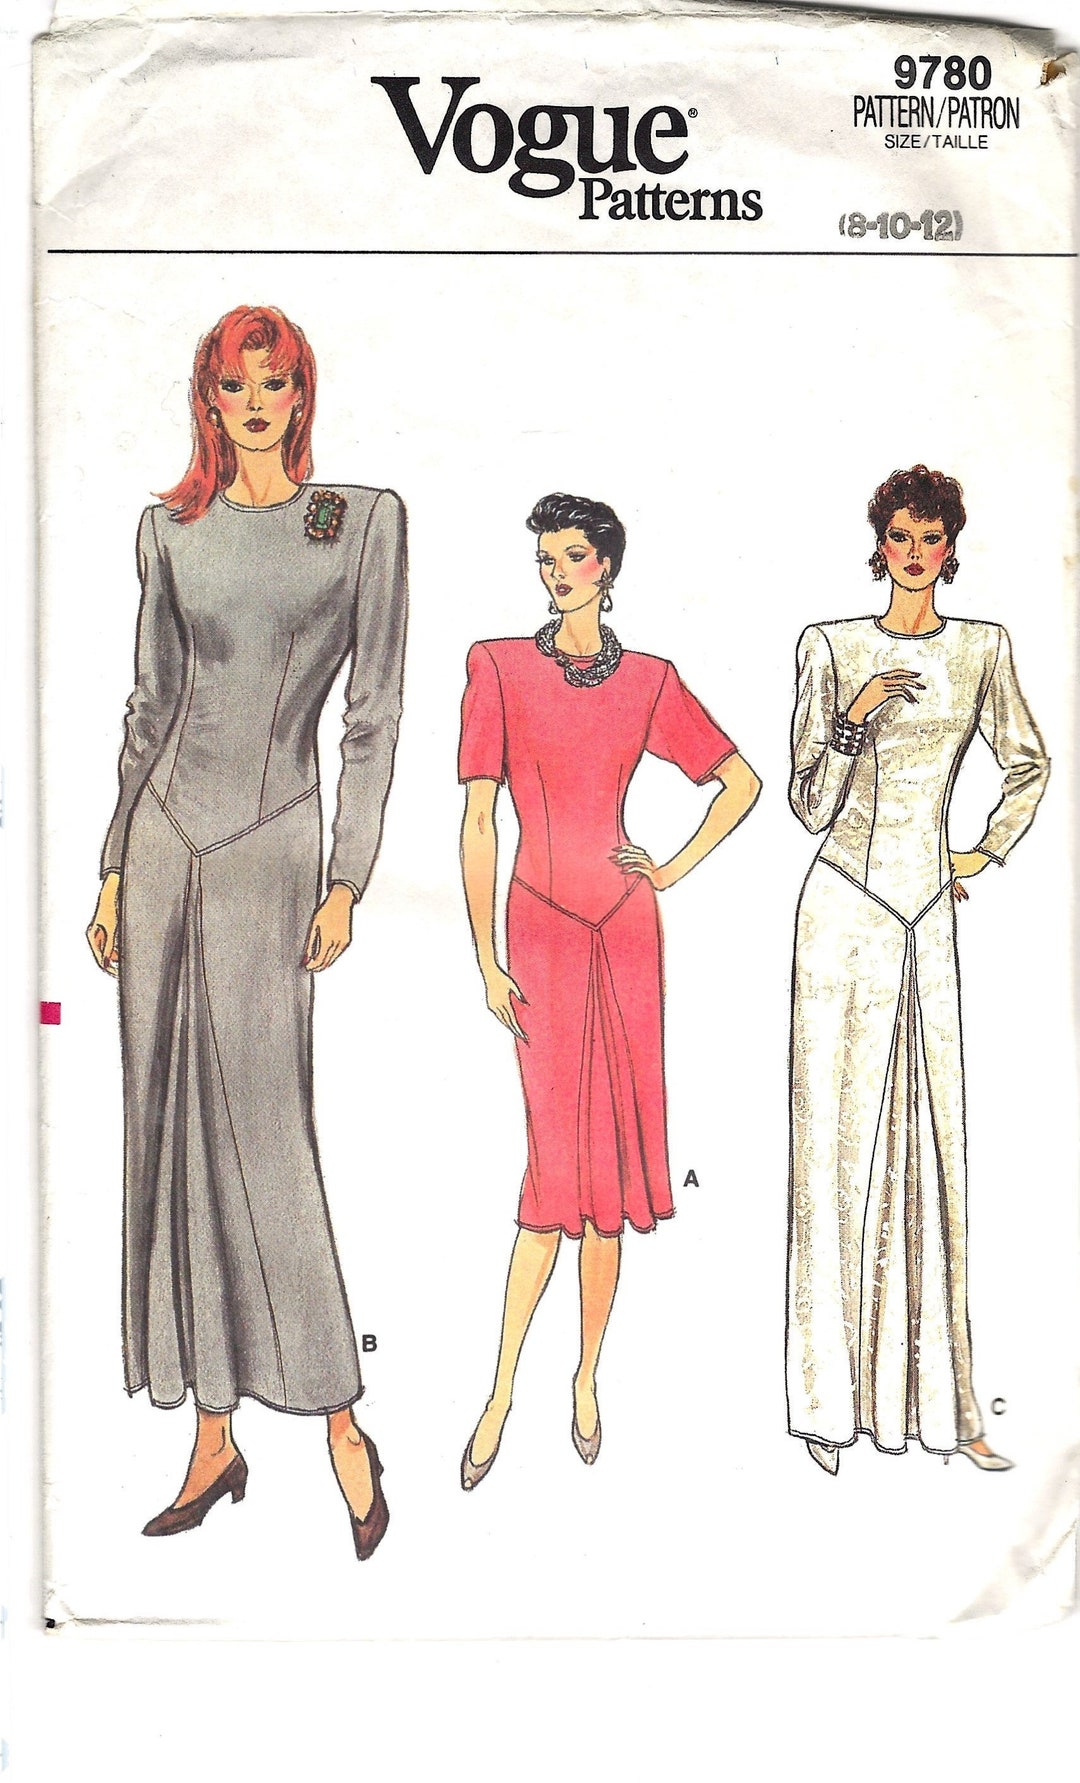 Vogue 9780 Misses' Slim Fitting Dress, Sewing Pattern, Size 8-10-12 - Etsy